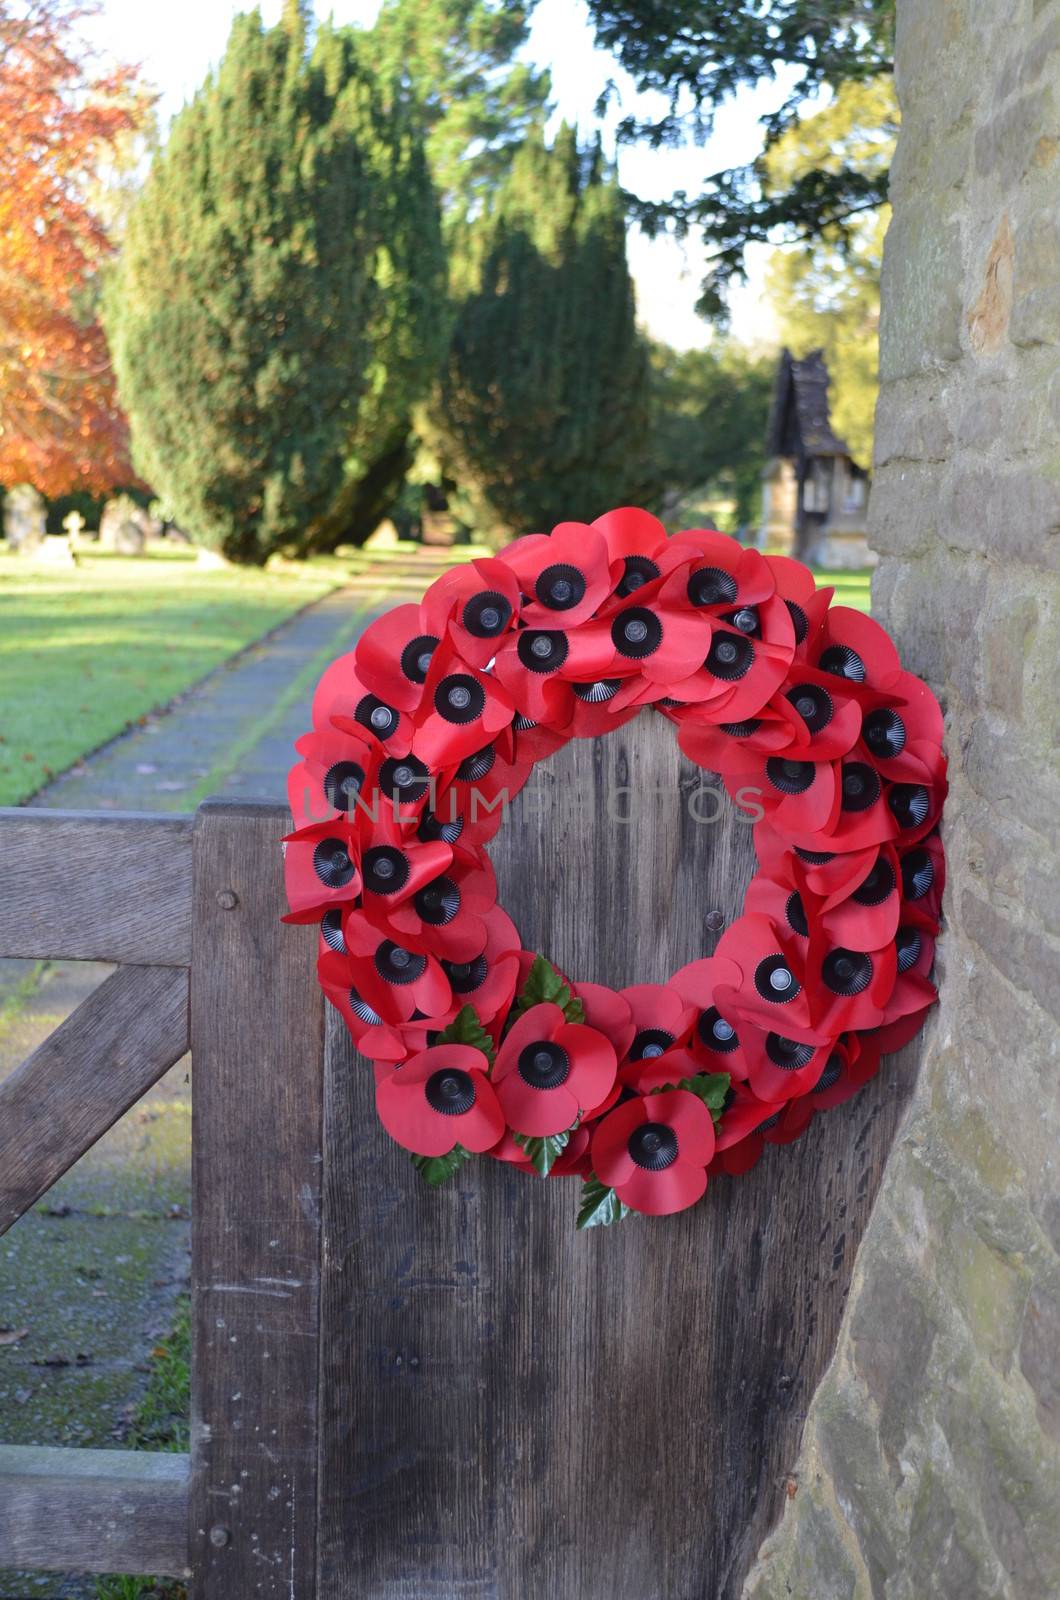 A poppy wreath on the gate entrance to a English church for a Remembrance Sunday service.